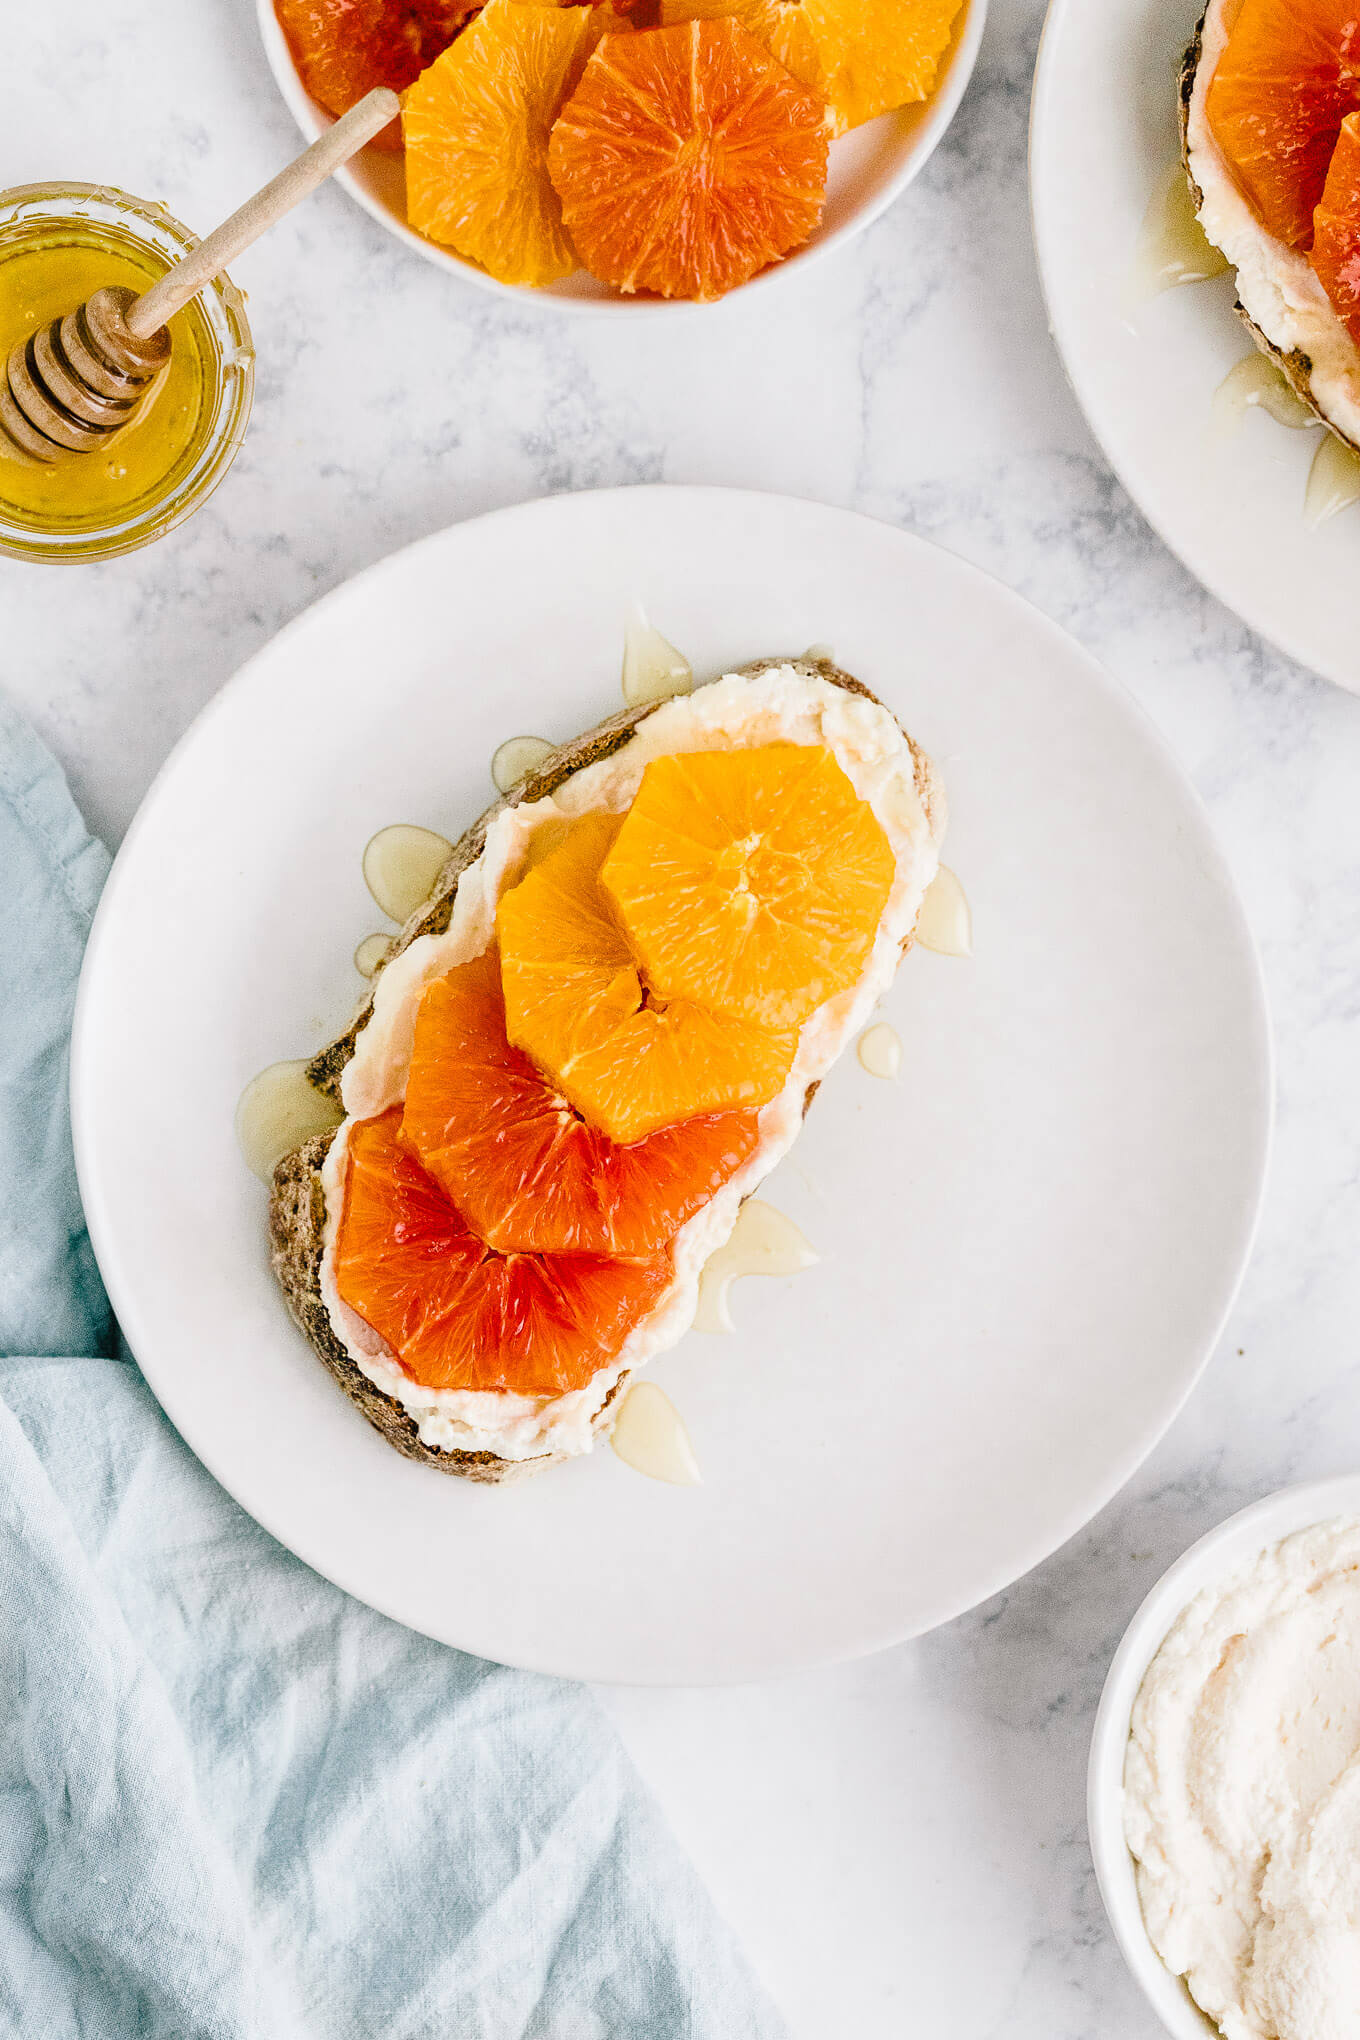 ricotta toast with orange slices and honey on plate